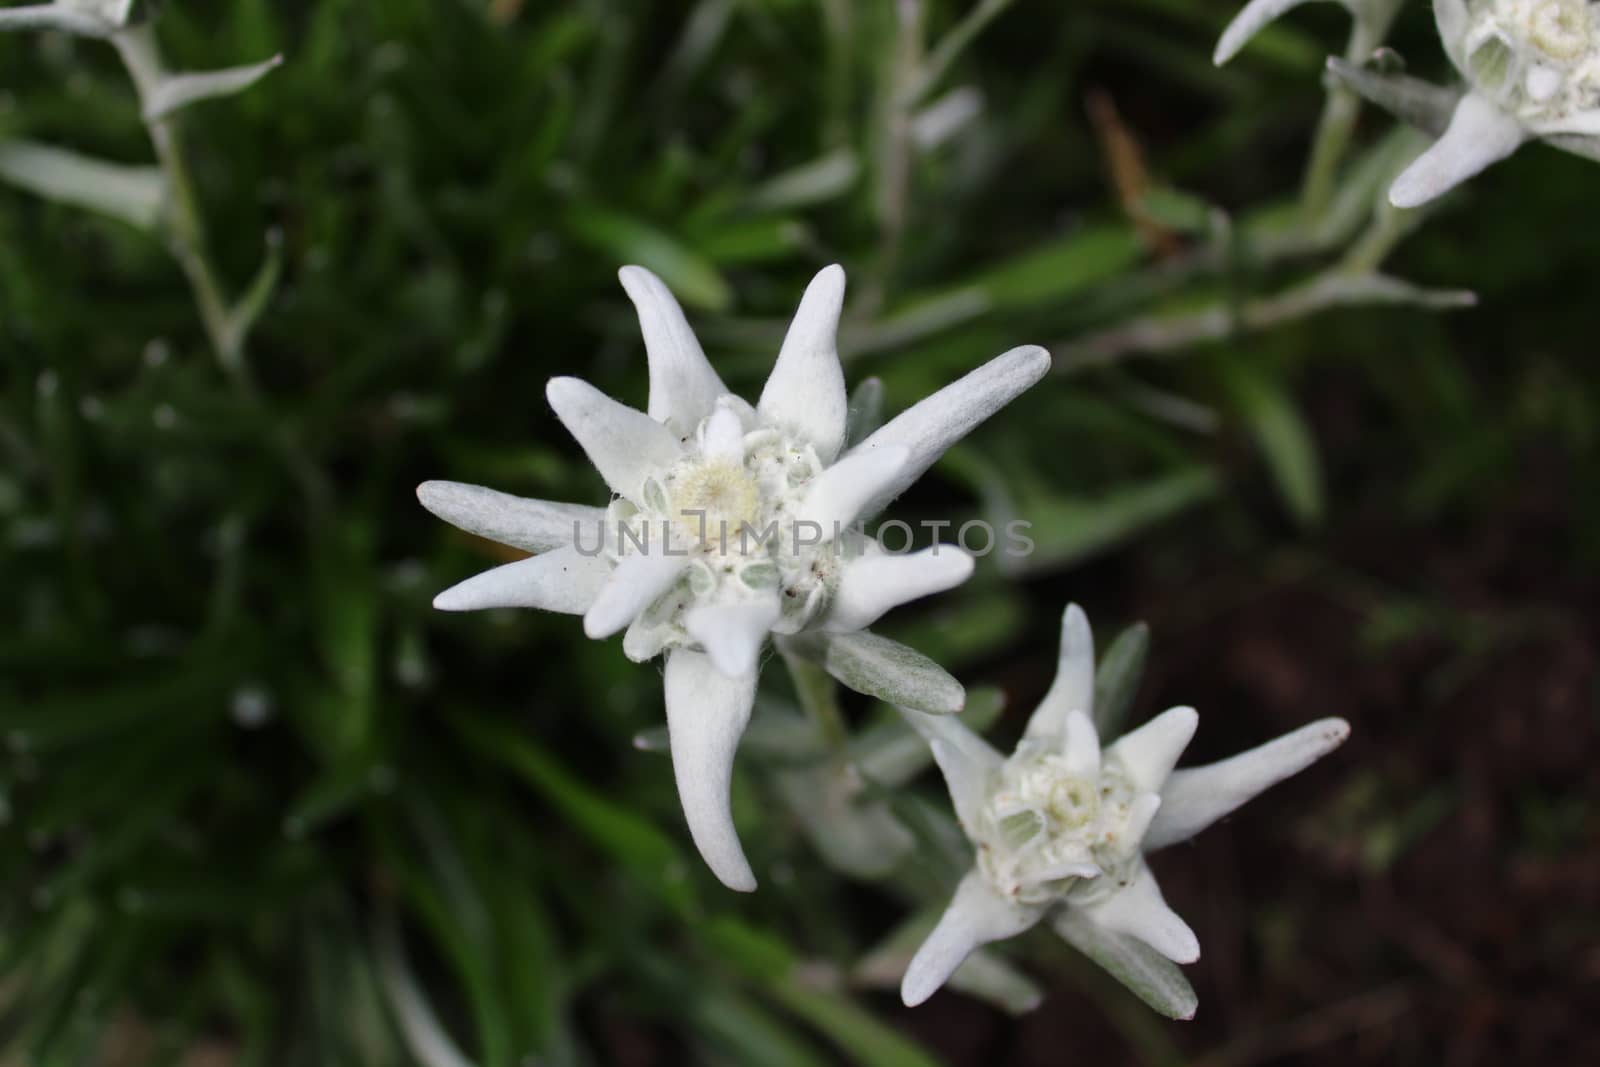 The picture shows blossoming edelweiss in the garden